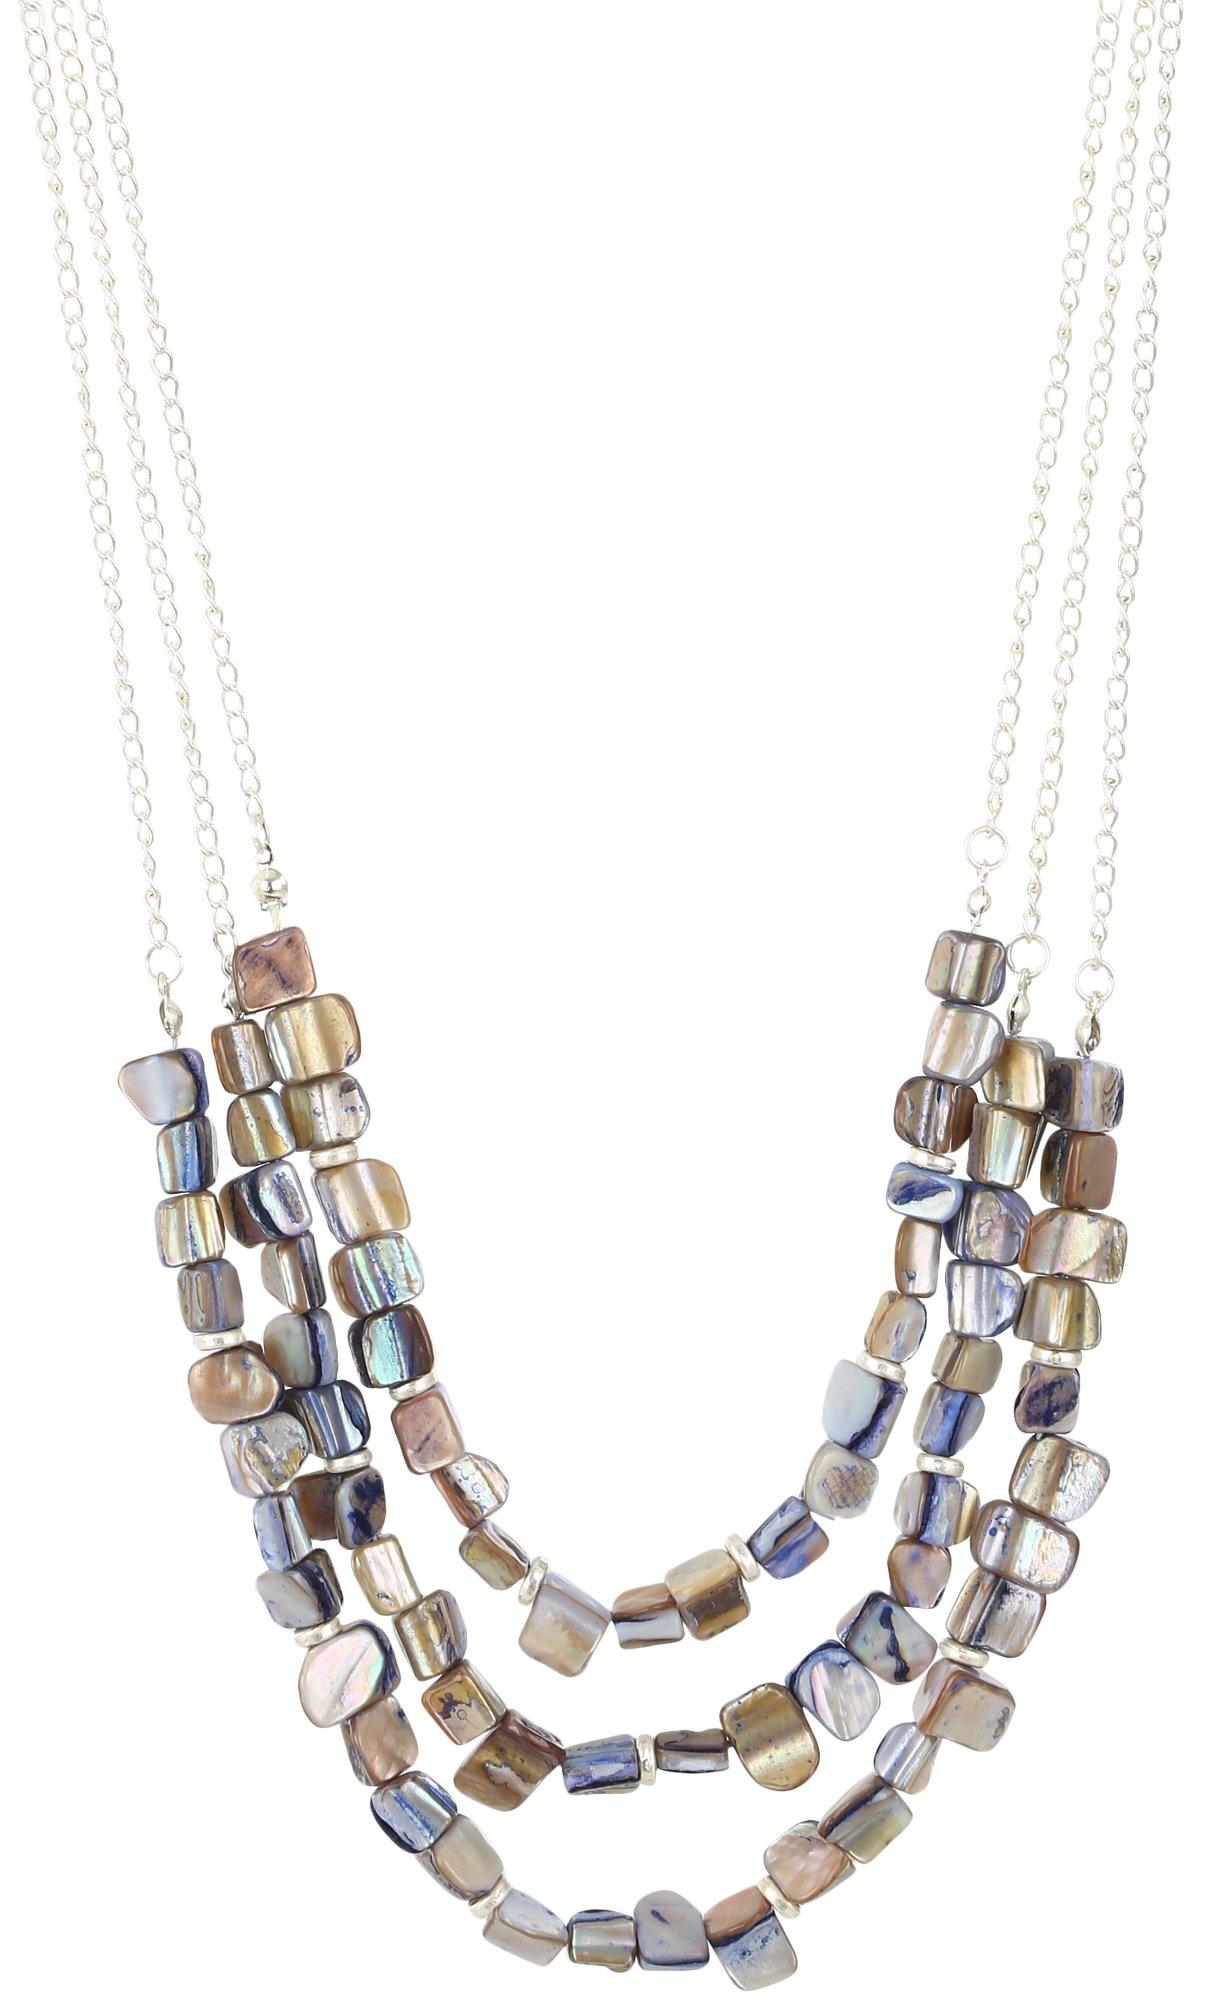 Bay Studio 3-Row 18 In. Shell Chip Frontal Necklace